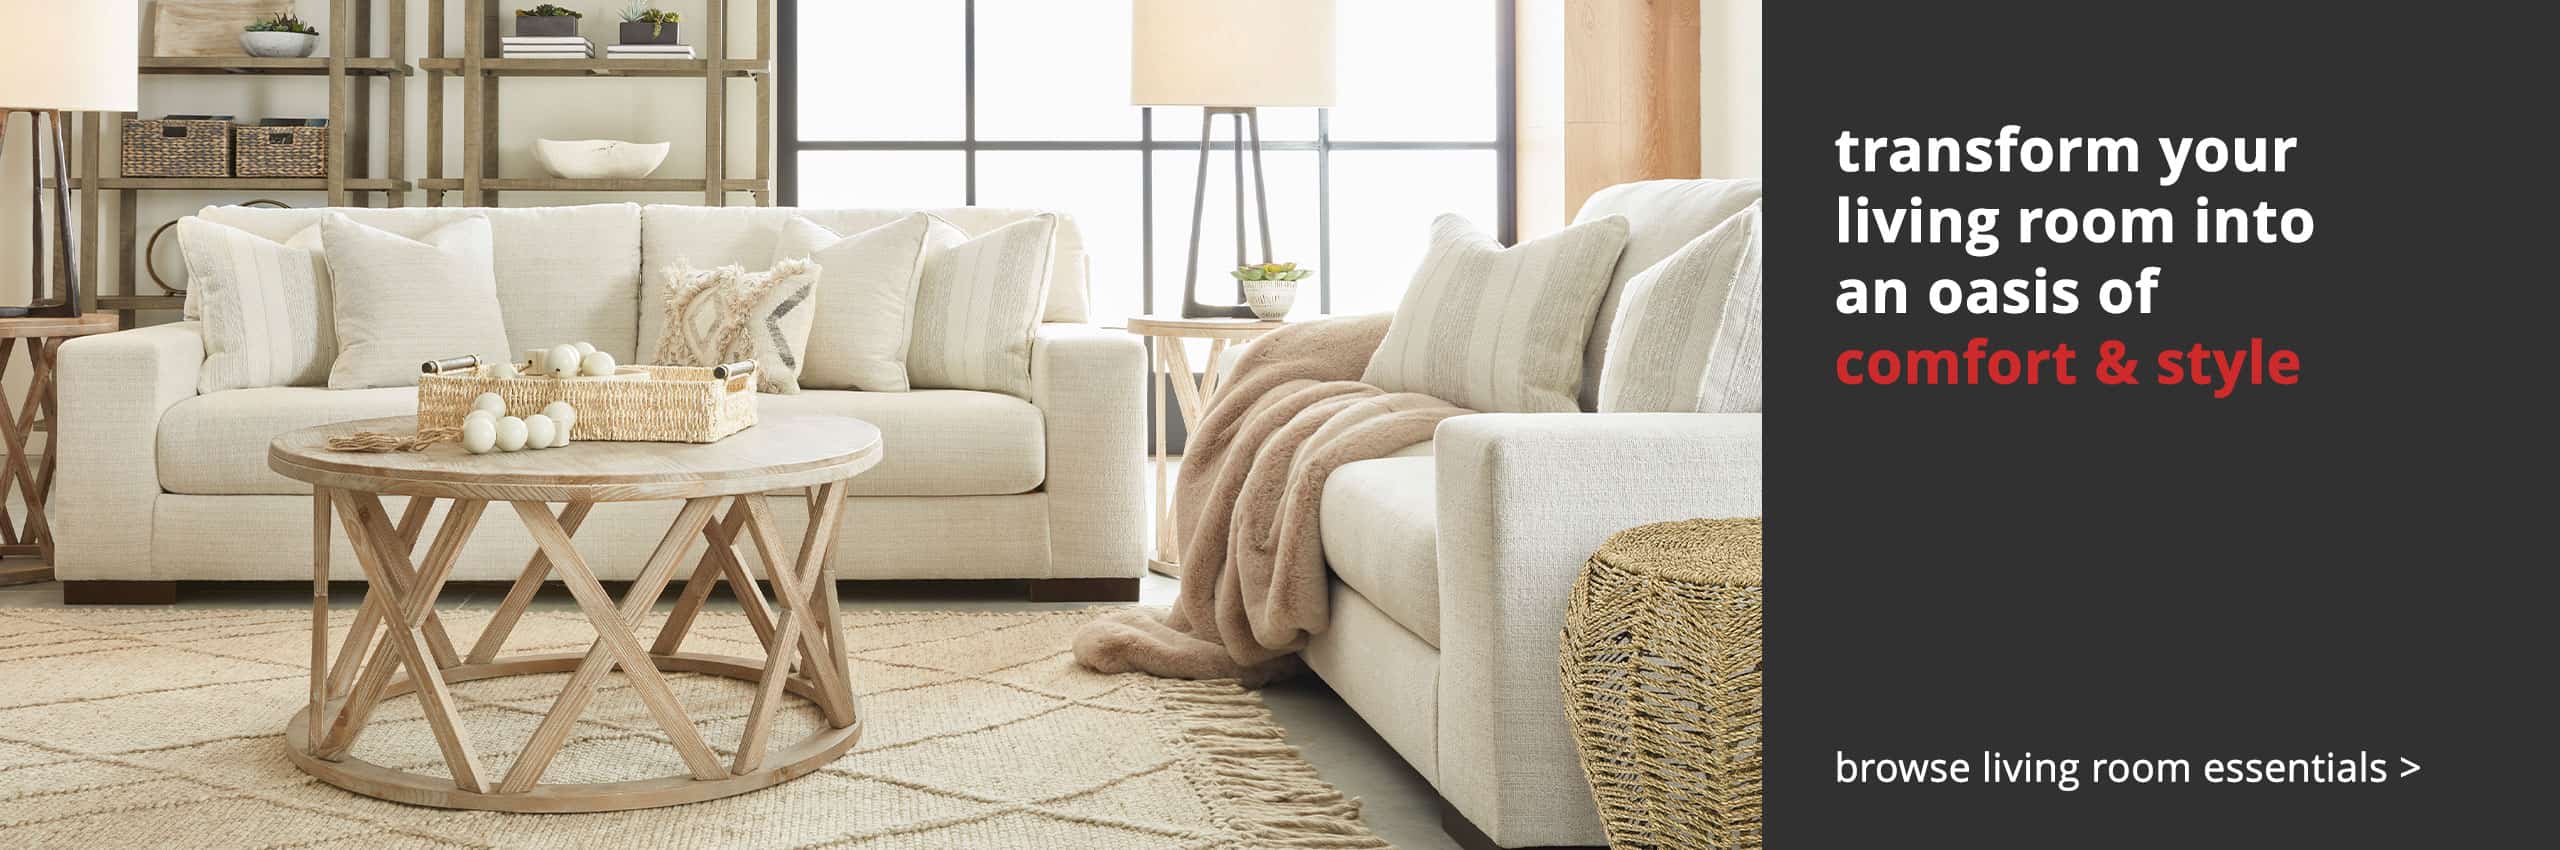 transform your living room into an oasis of comfort and style – browse living room essentials